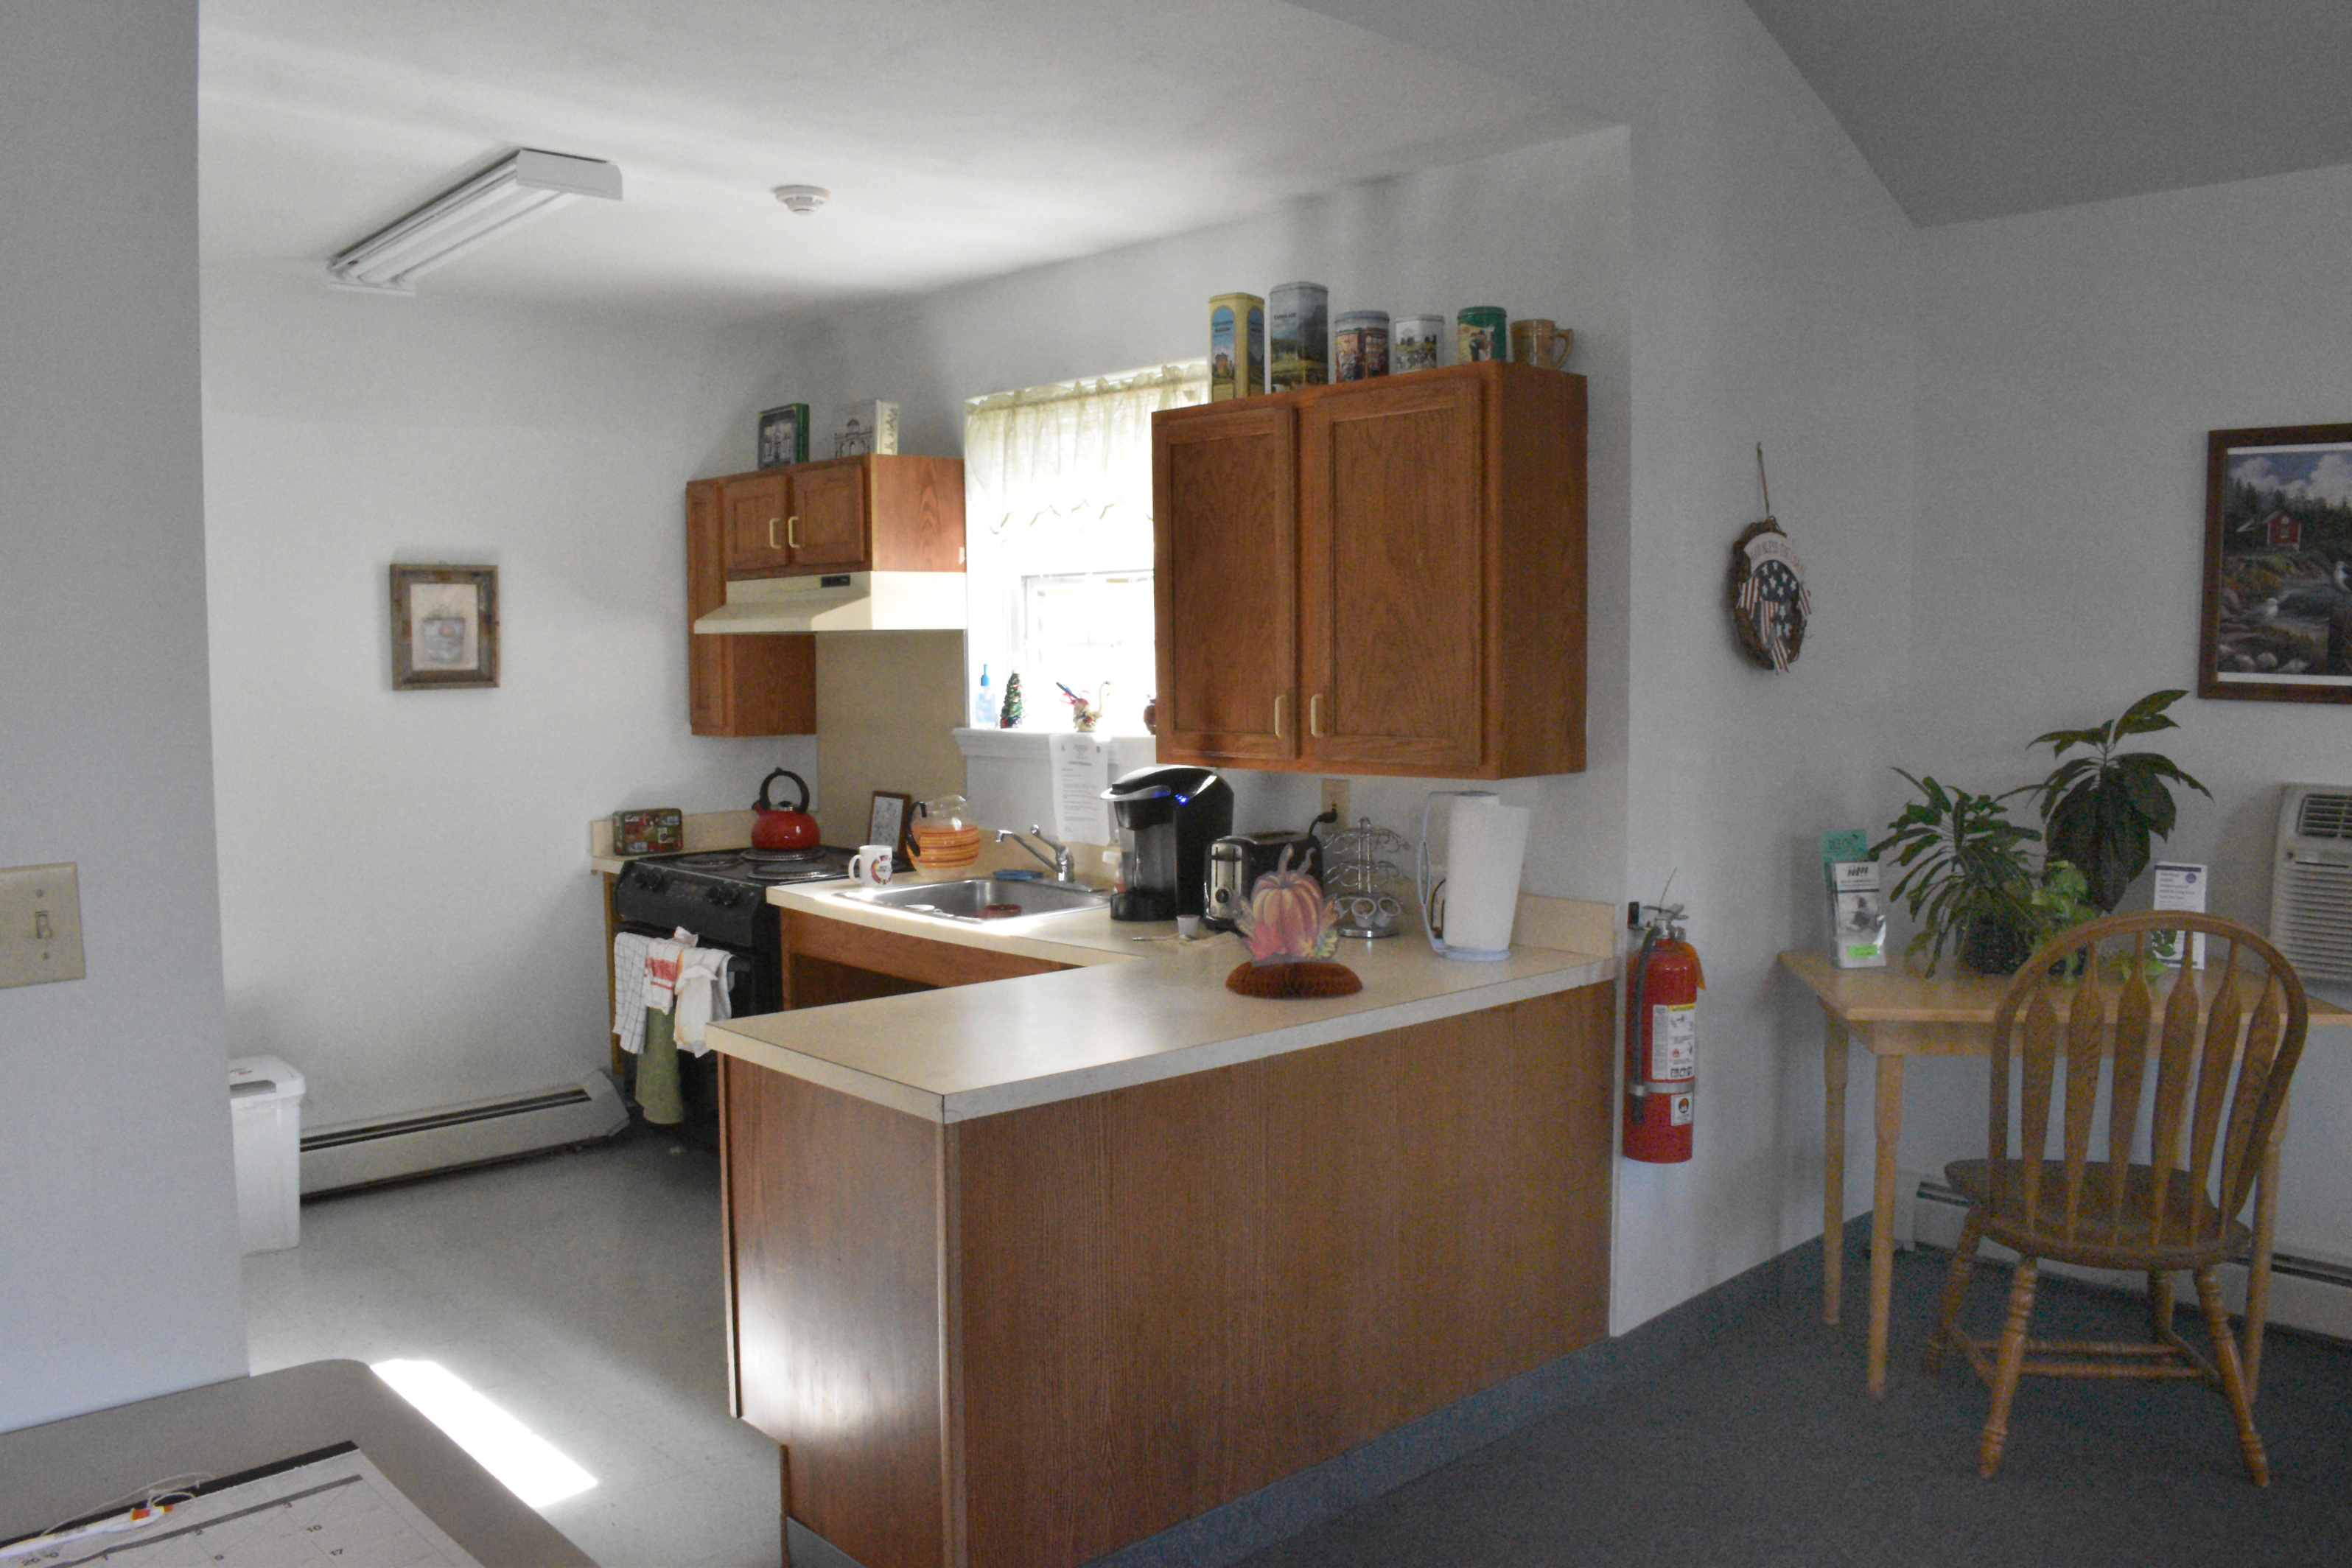 property management company syracuse ny image of community room kitchen at eastview gardens